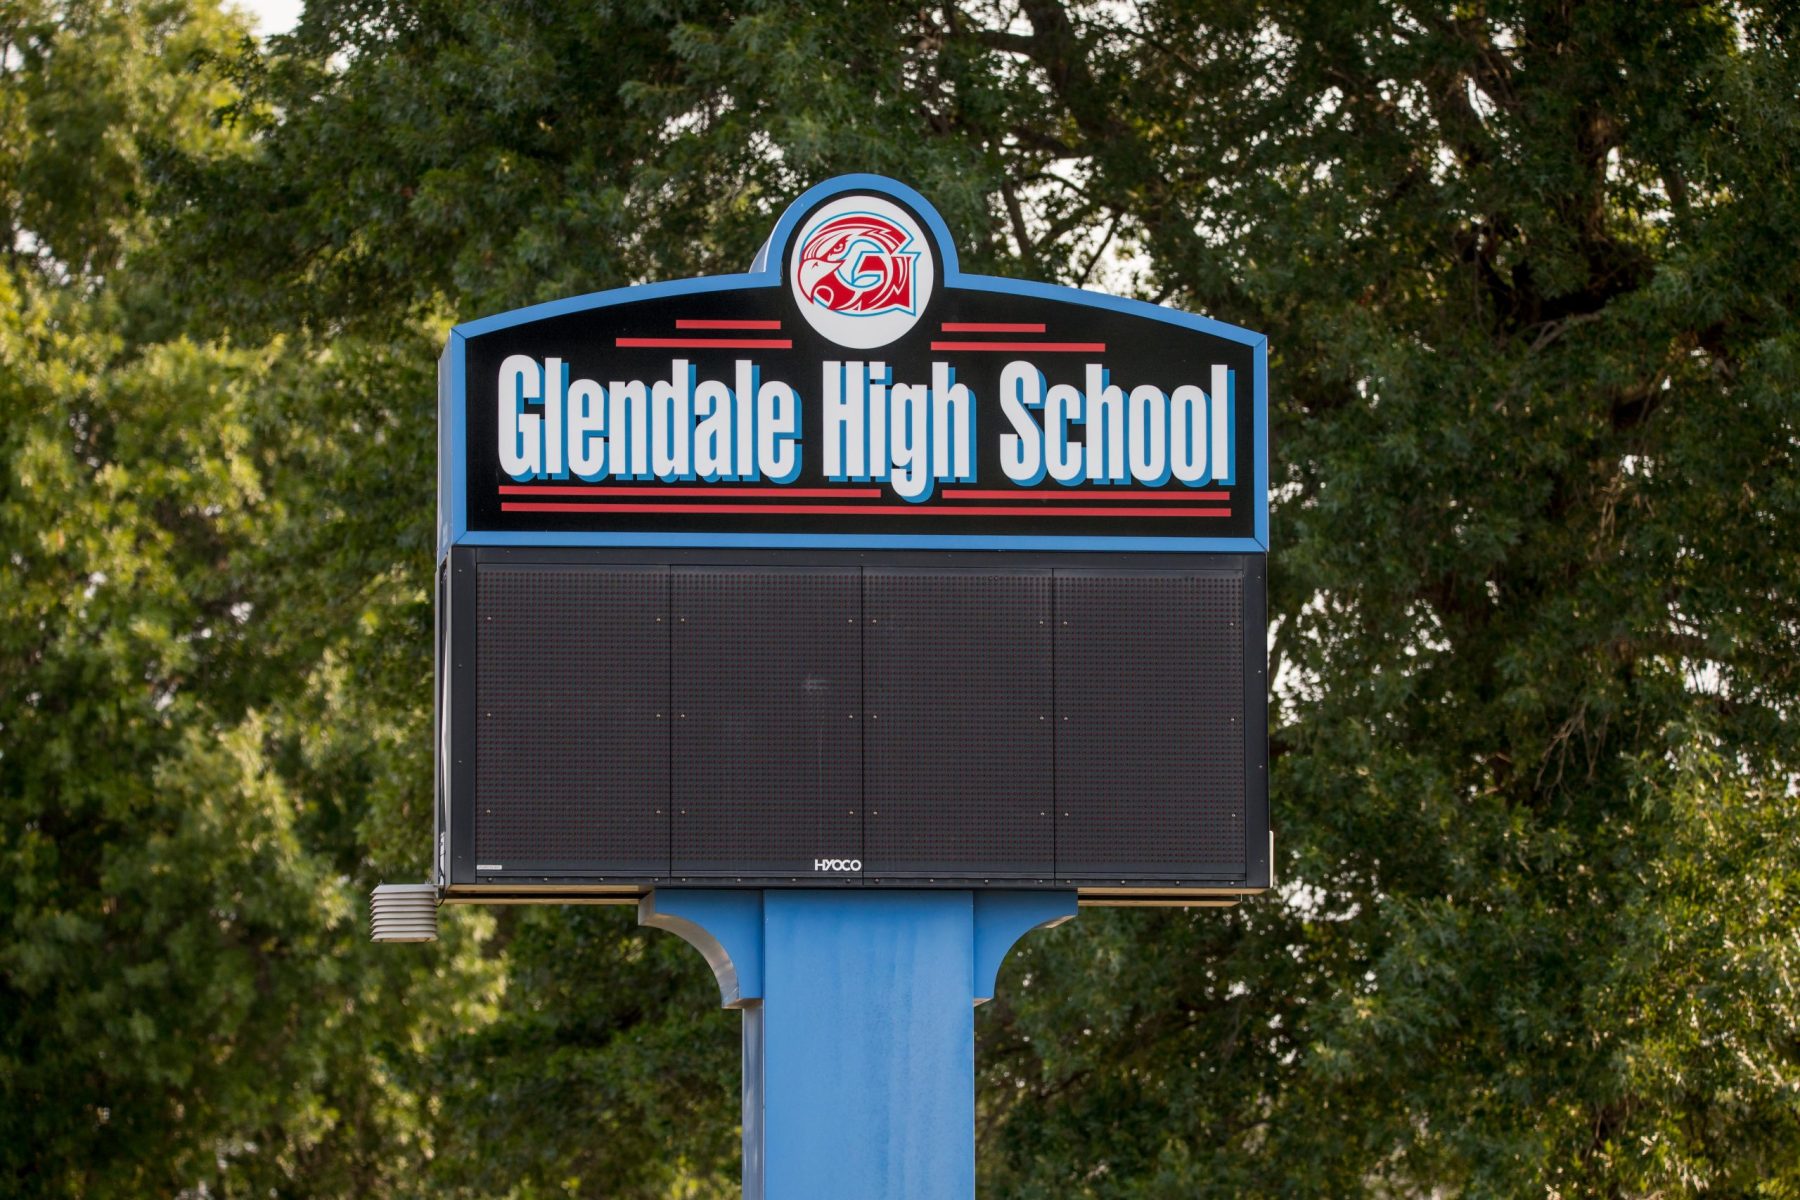 The Glendale High School sign with trees in the background.